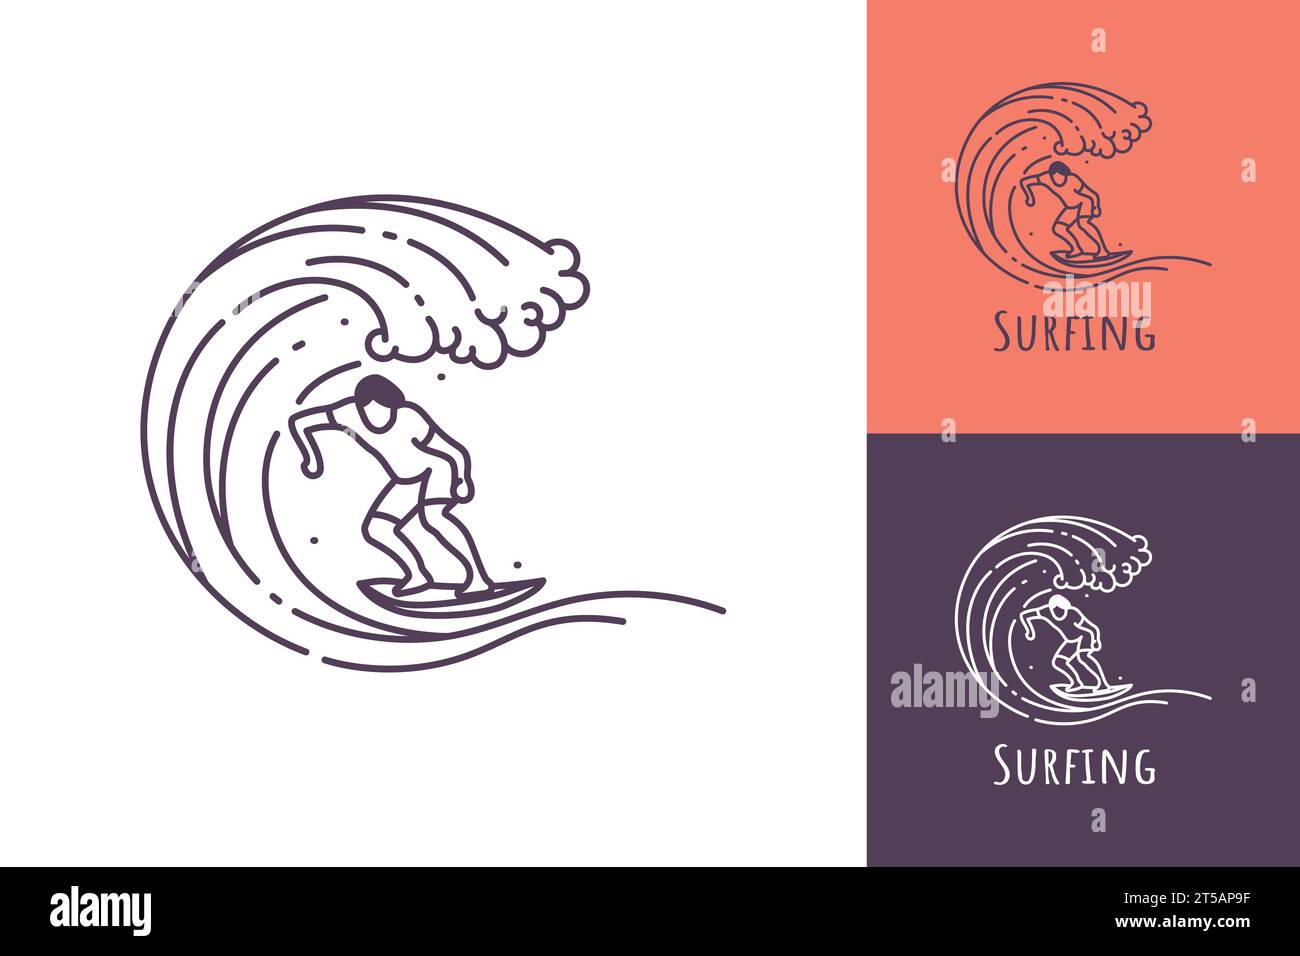 Surfing line art logo of a man surfing in a rolling ocean wave vector ...